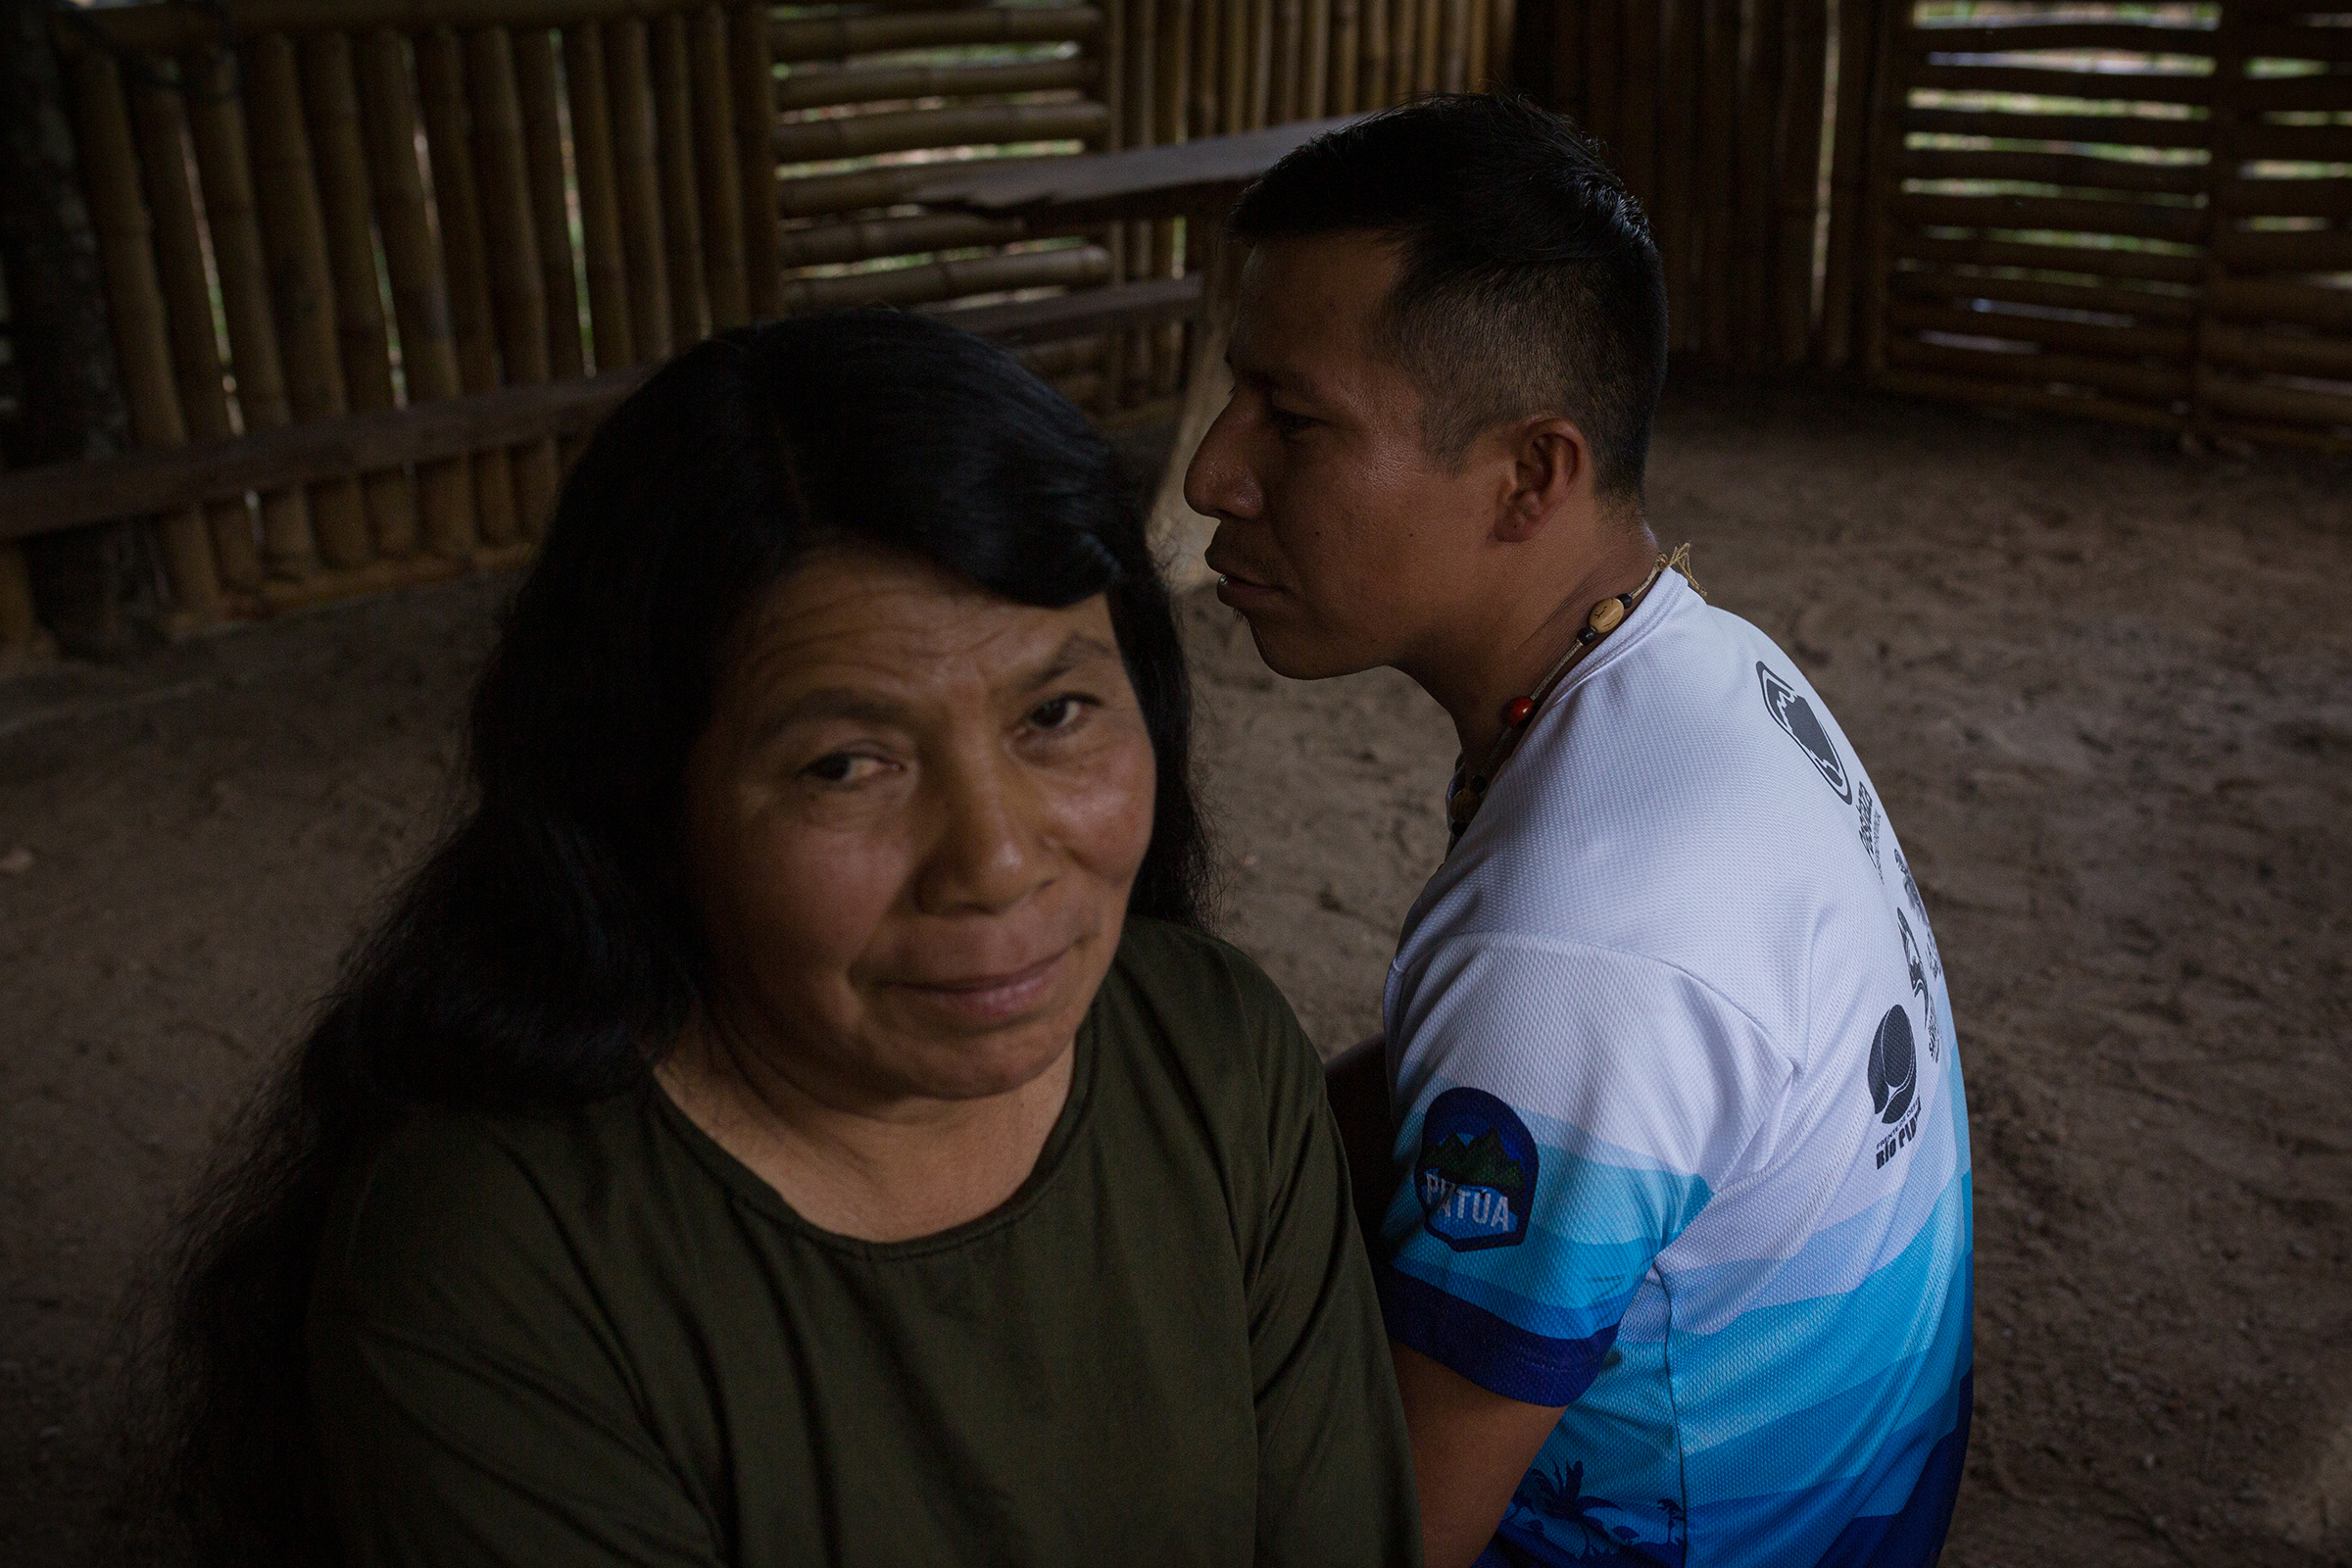 Pablo and his mother Inés Alvarado are residents of the Yayayaku community. They live next to the river and are pictured in their home. (Andrés Yépez for TIME)